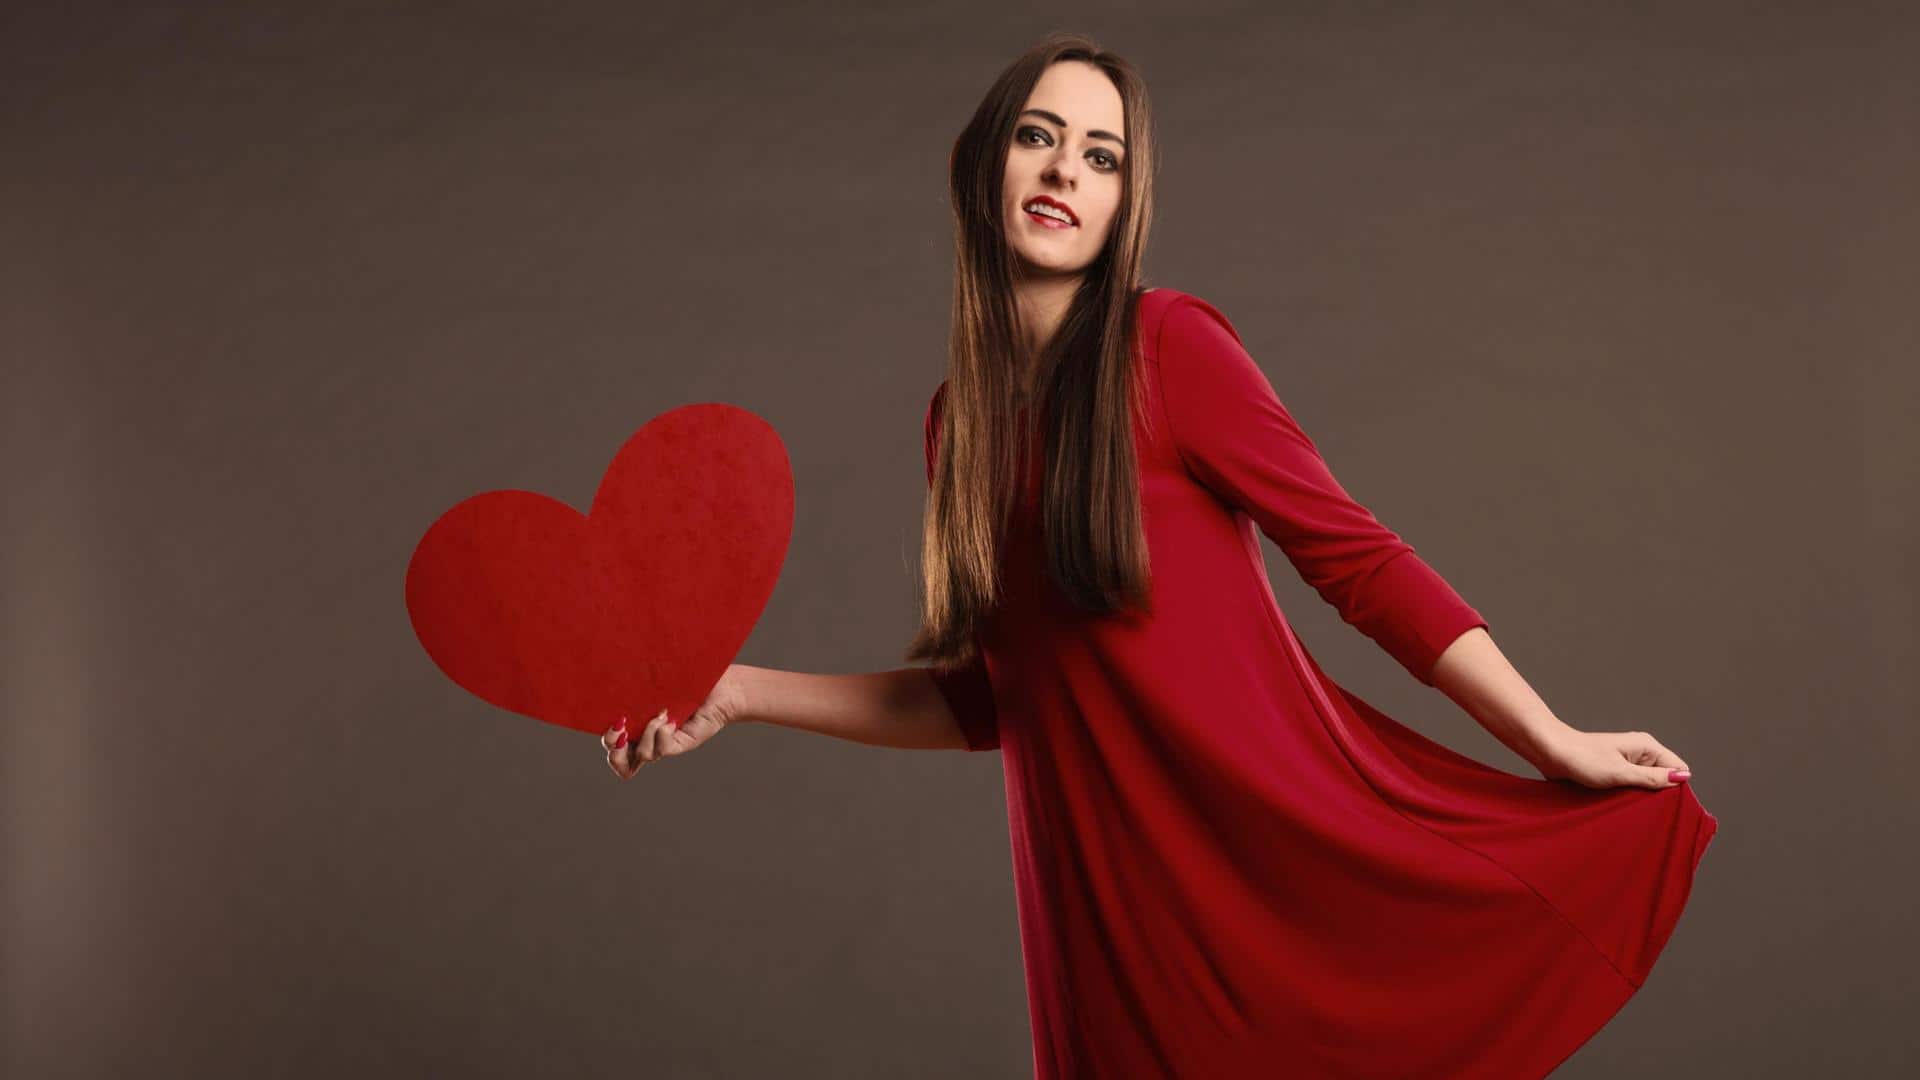 Looking for fashionable outfits this Valentine's Day? Check these out